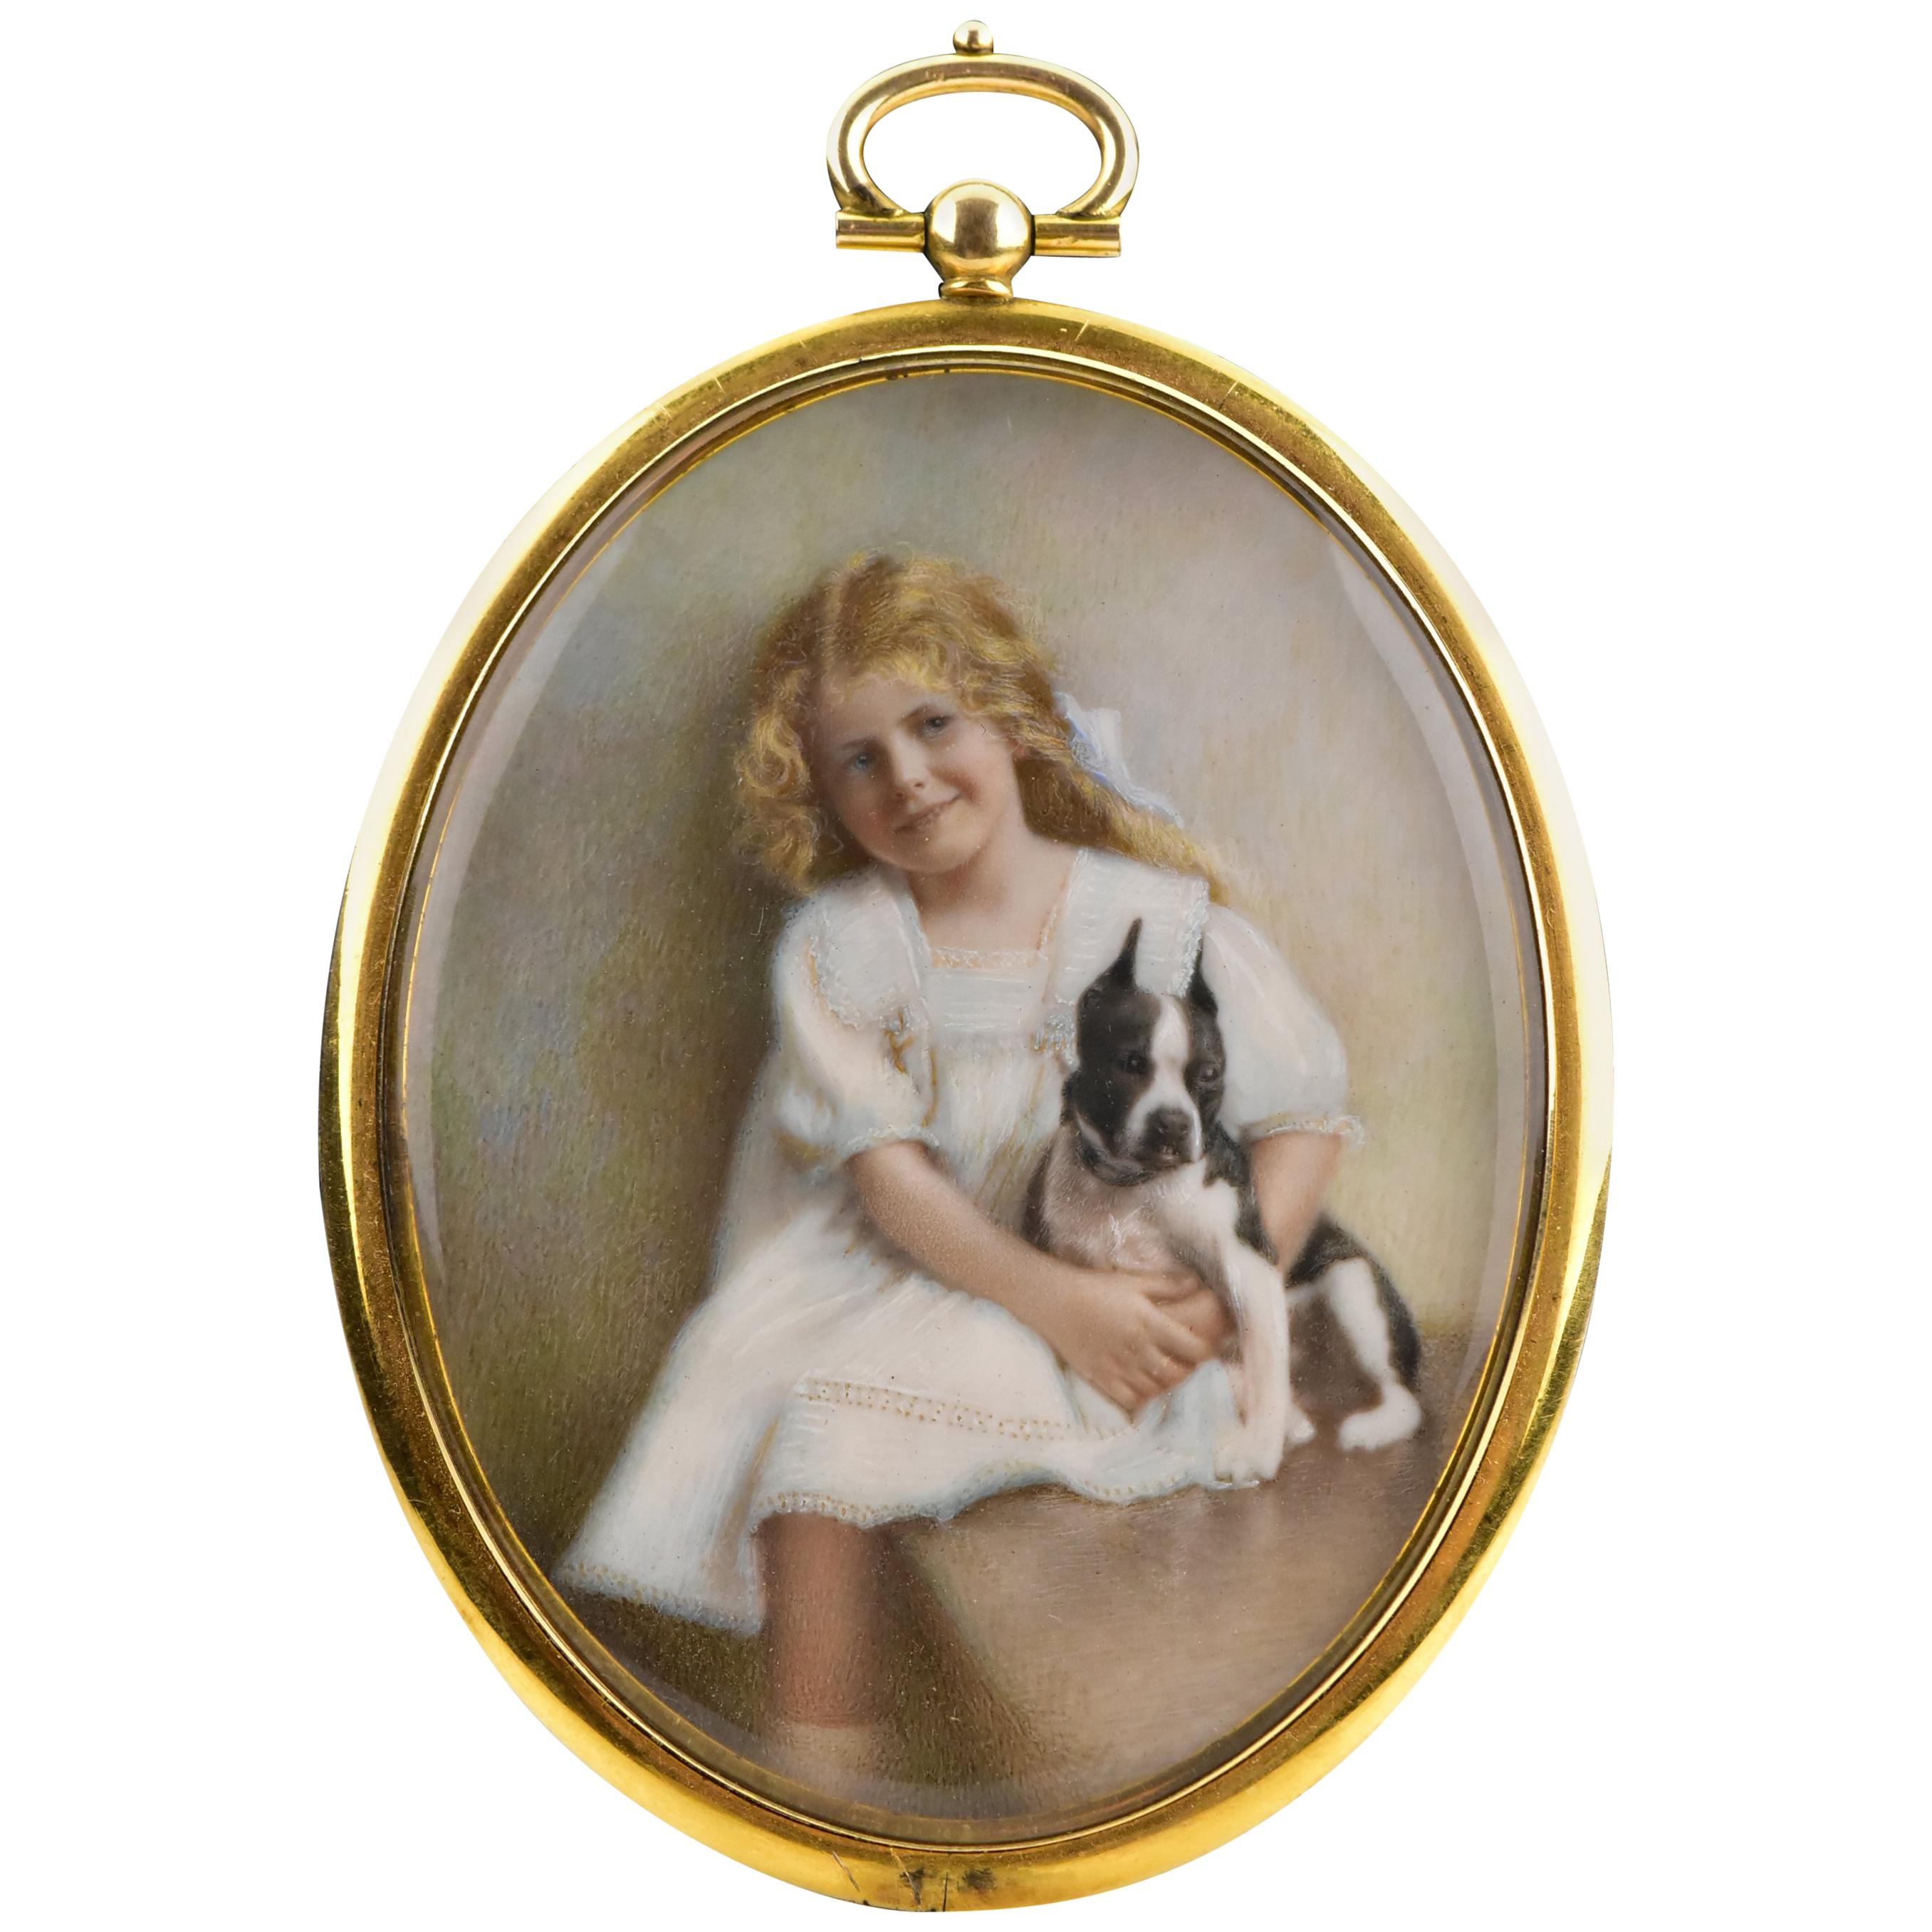 Early 20th Century Miniature Portrait Painting of Young Girl with Terrier Dog